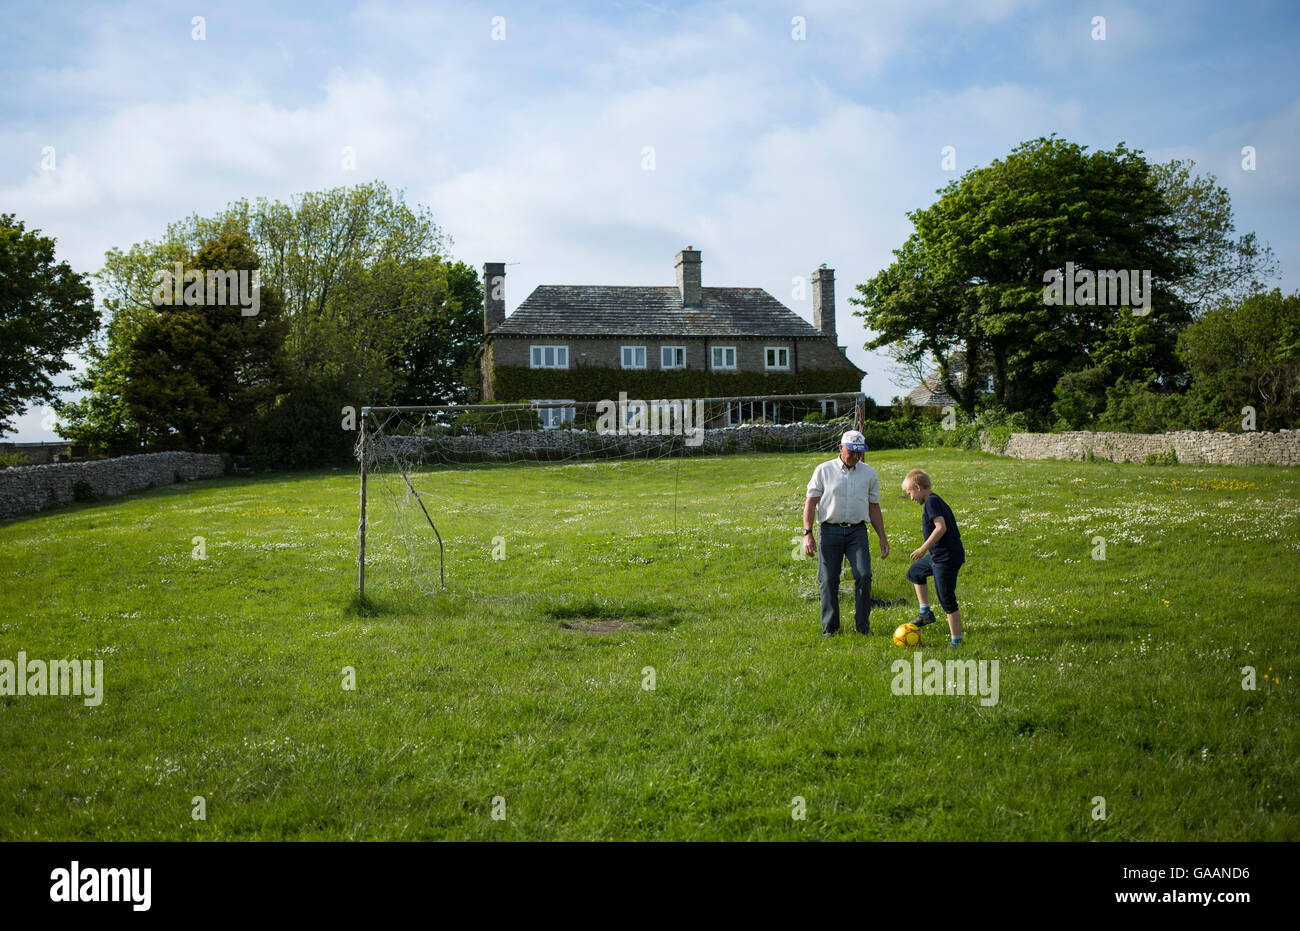 A young boy and an older man play football in a field outside Worth Matravers, Dorset, UK Stock Photo